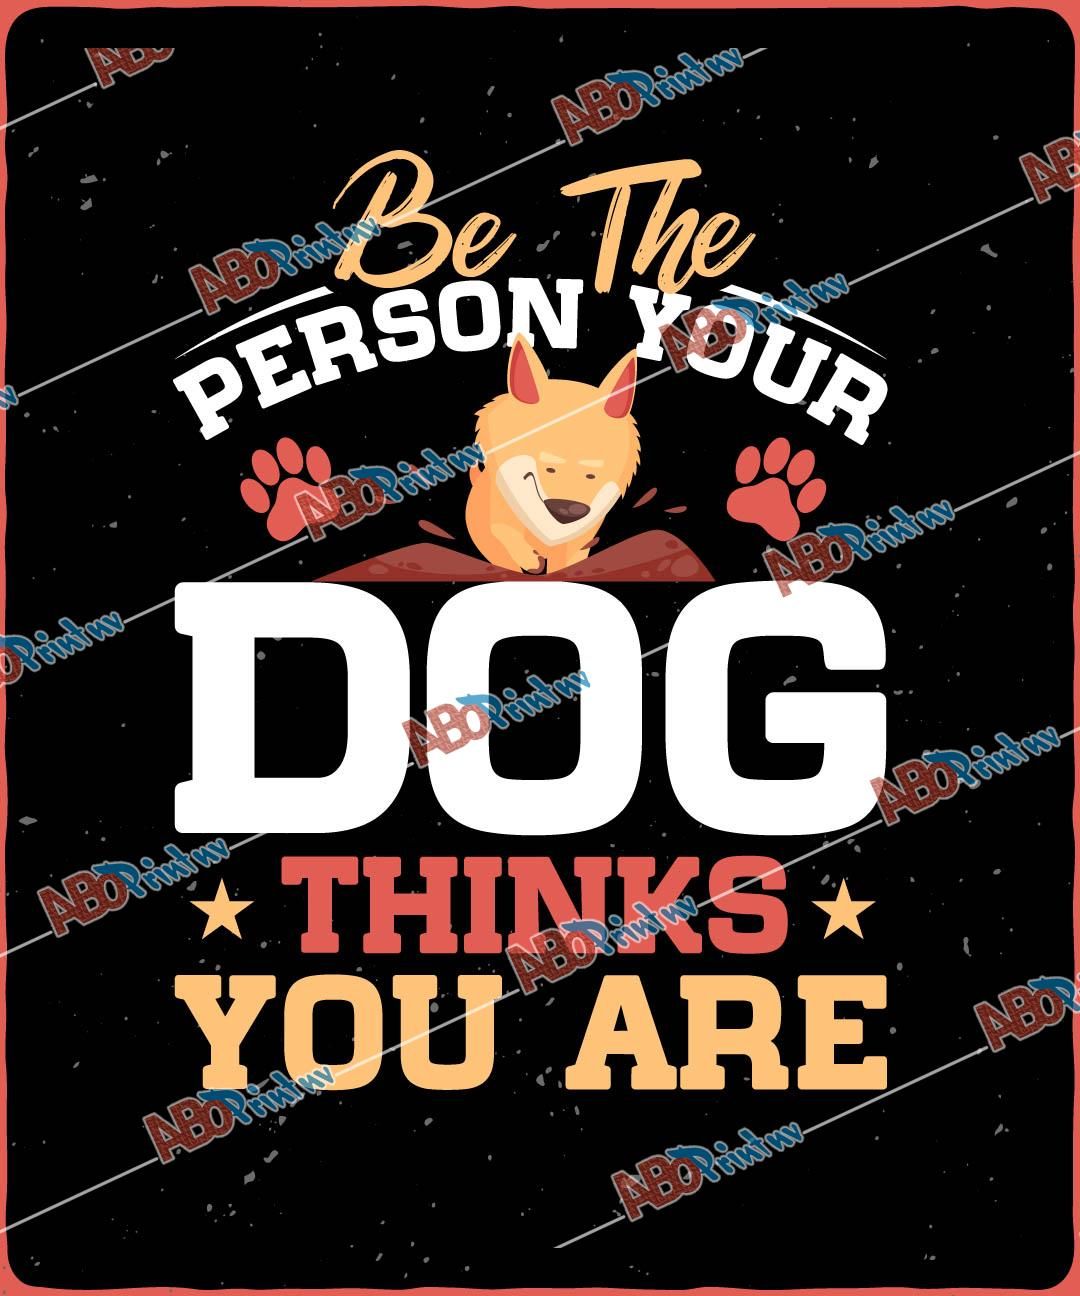 Be The Person Your Dog Thinks You AreJPG (1).jpg